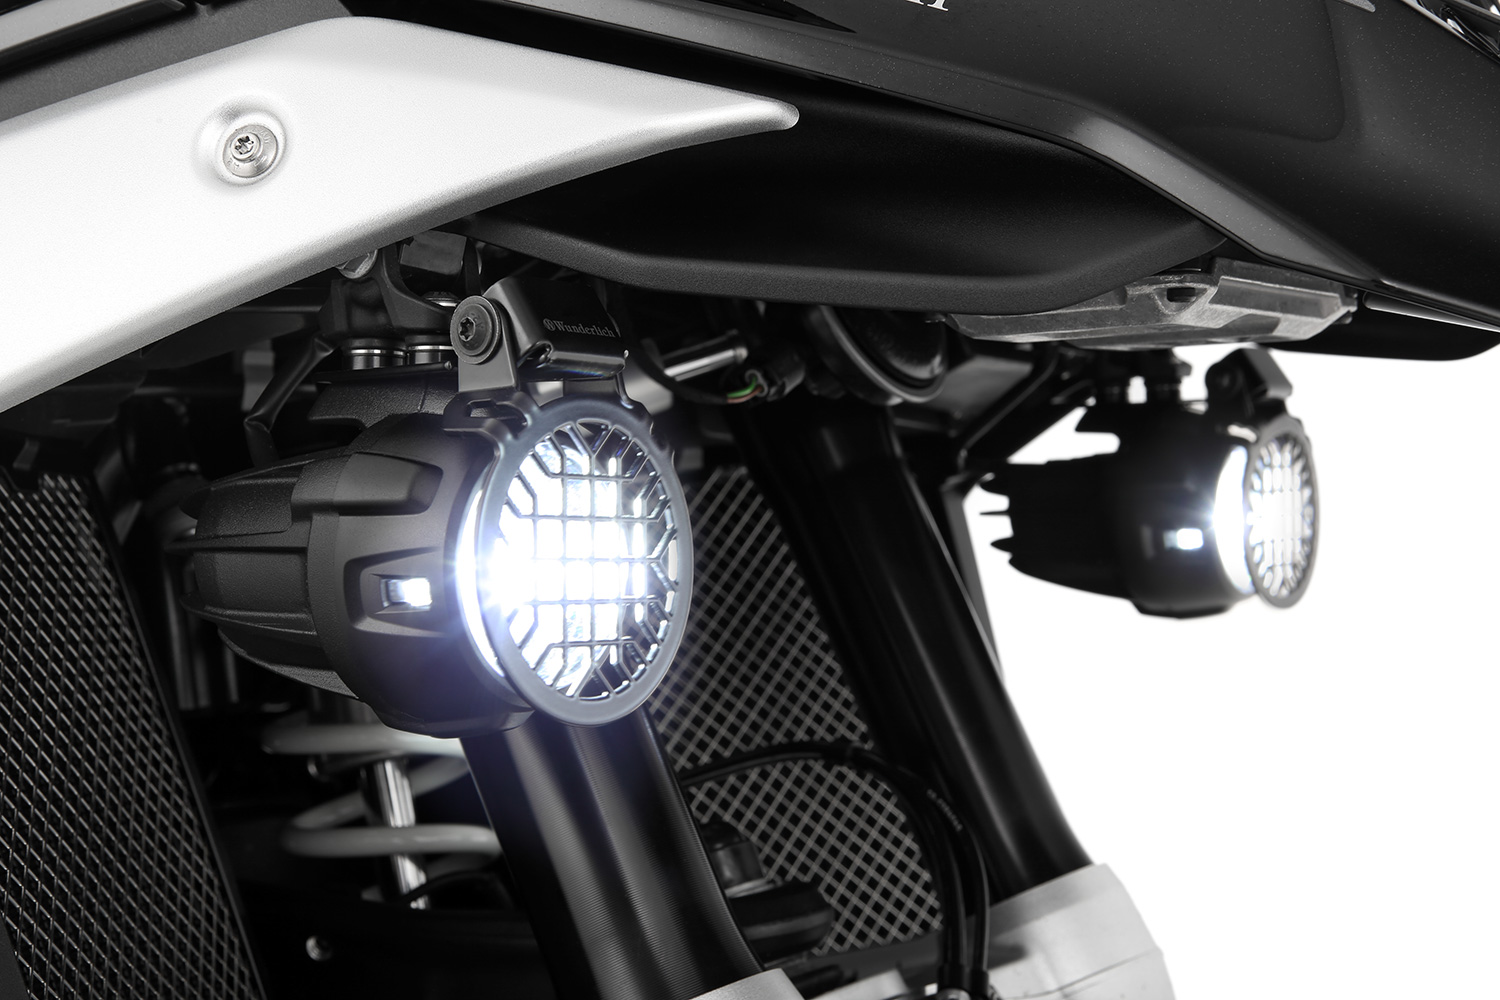 Wunderlich - The No. 1 for BMW motorcycle accessories